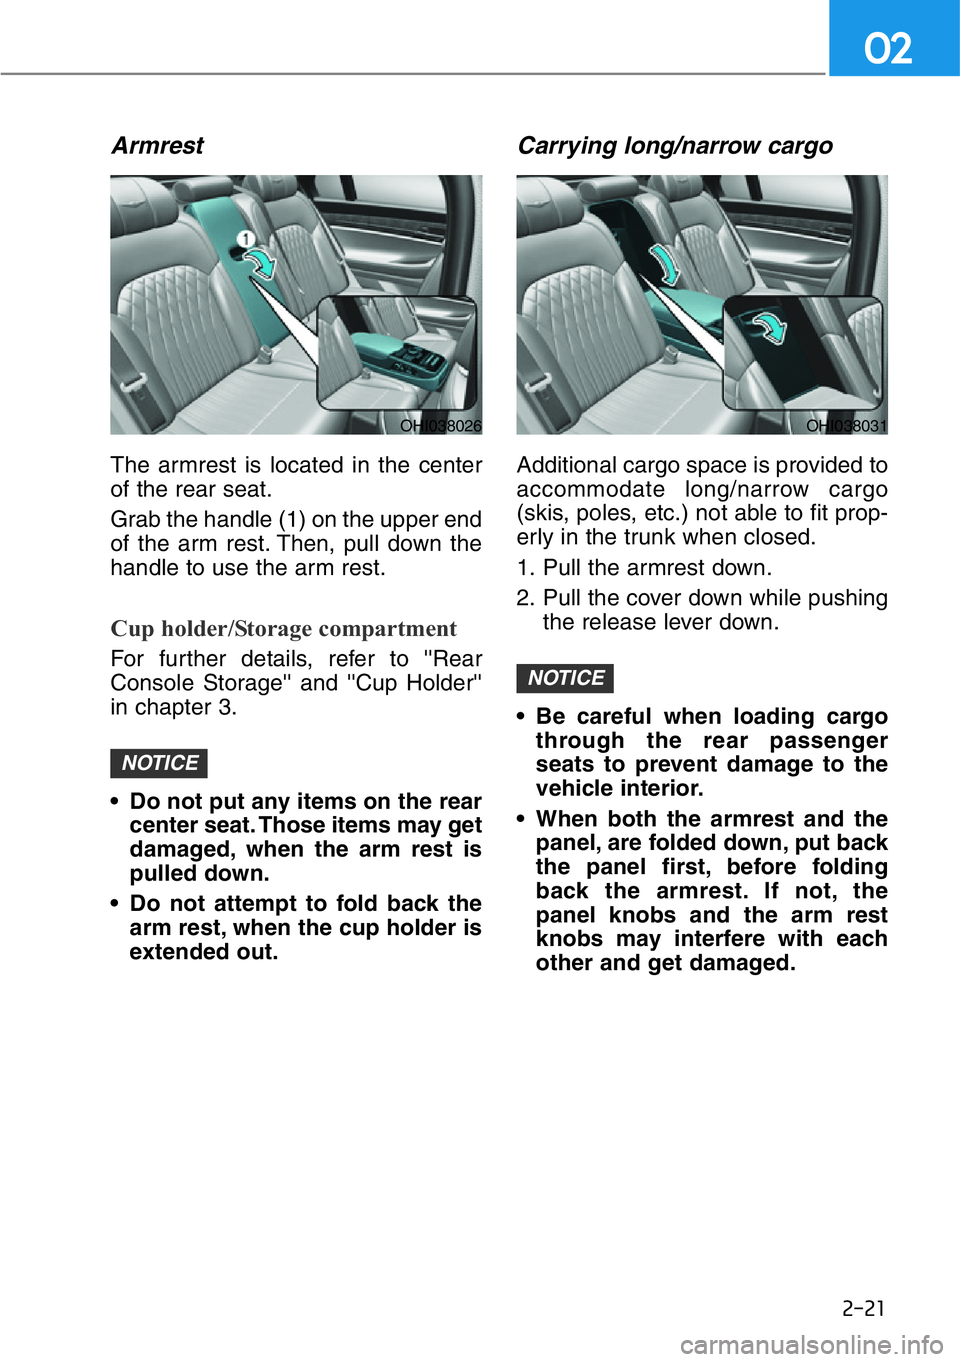 HYUNDAI GENESIS G90 2017  Owners Manual 2-21
02
Armrest
The armrest is located in the center
of the rear seat.
Grab the handle (1) on the upper end
of the arm rest. Then, pull down the
handle to use the arm rest.
Cup holder/Storage compartm